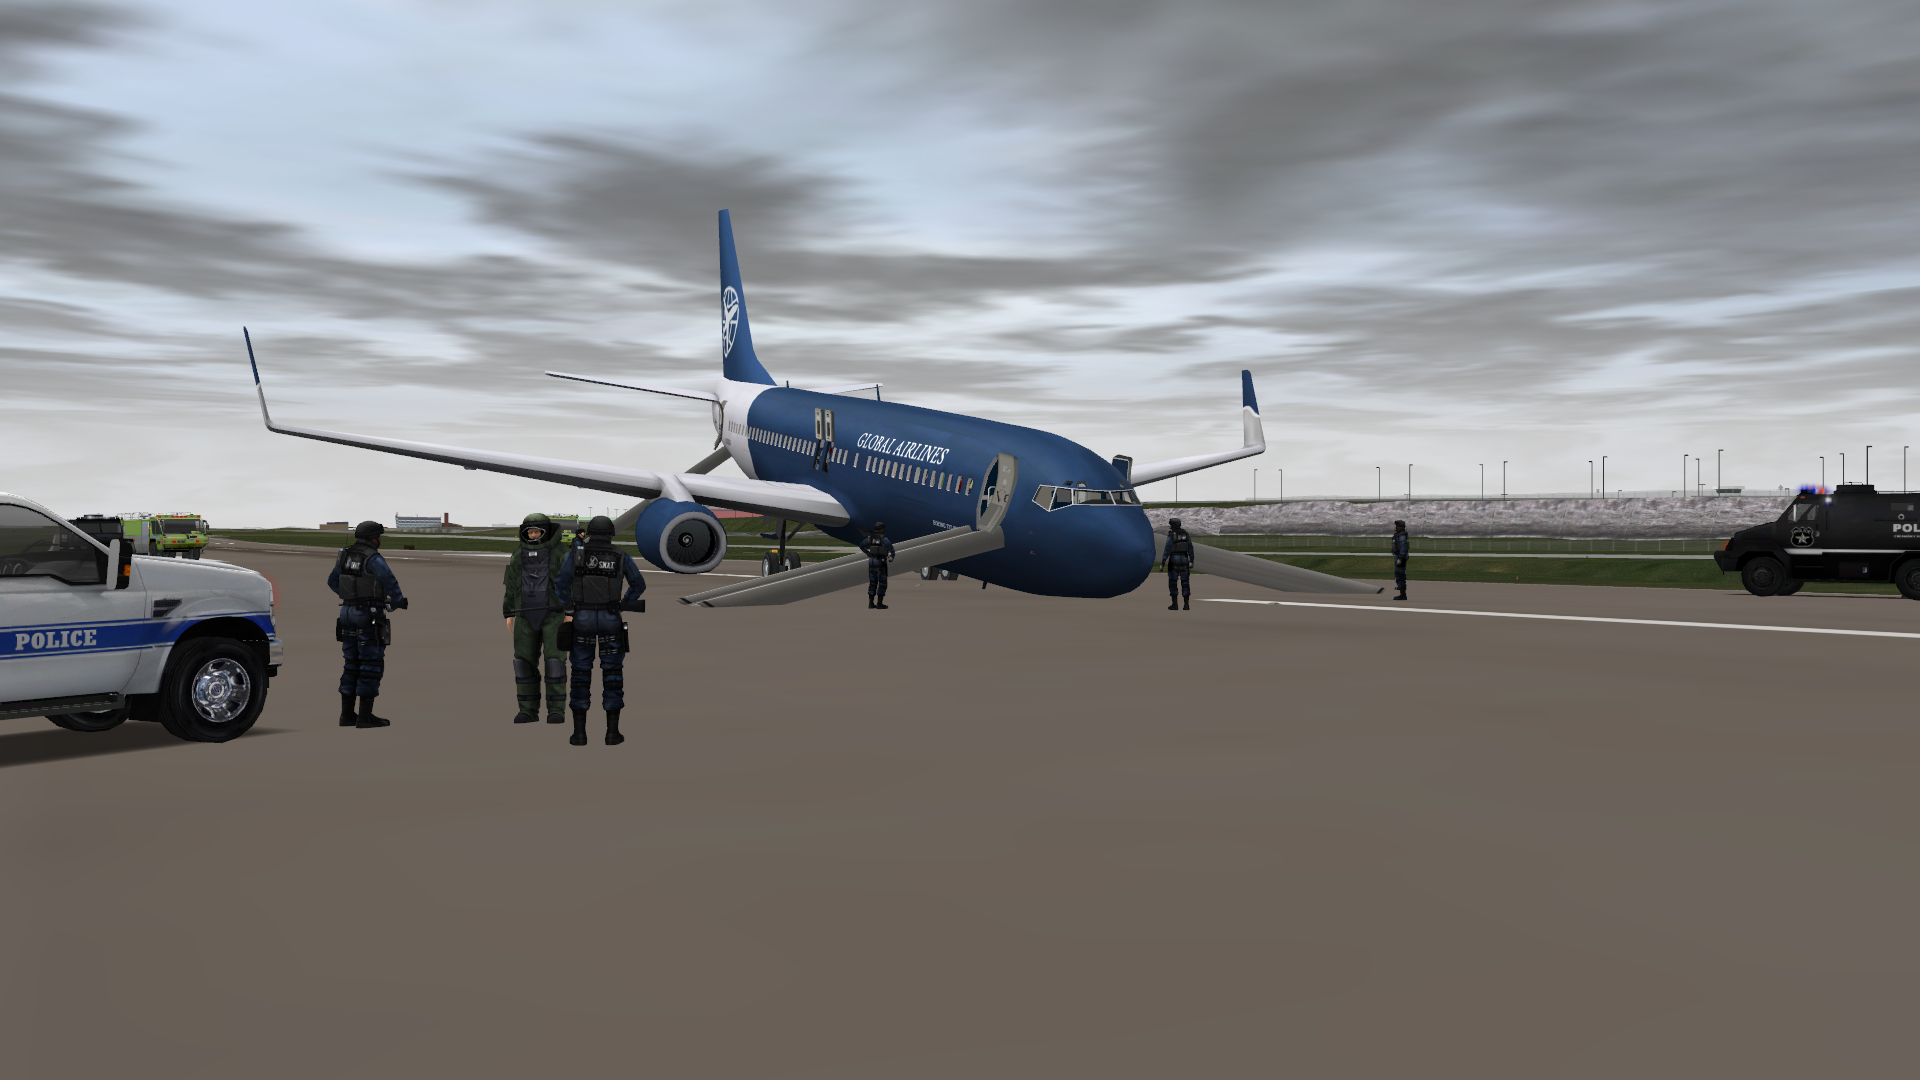 Special forces surrounding a hijacked plane that crash-landed at the airport, creative scenario built with ADMS.  